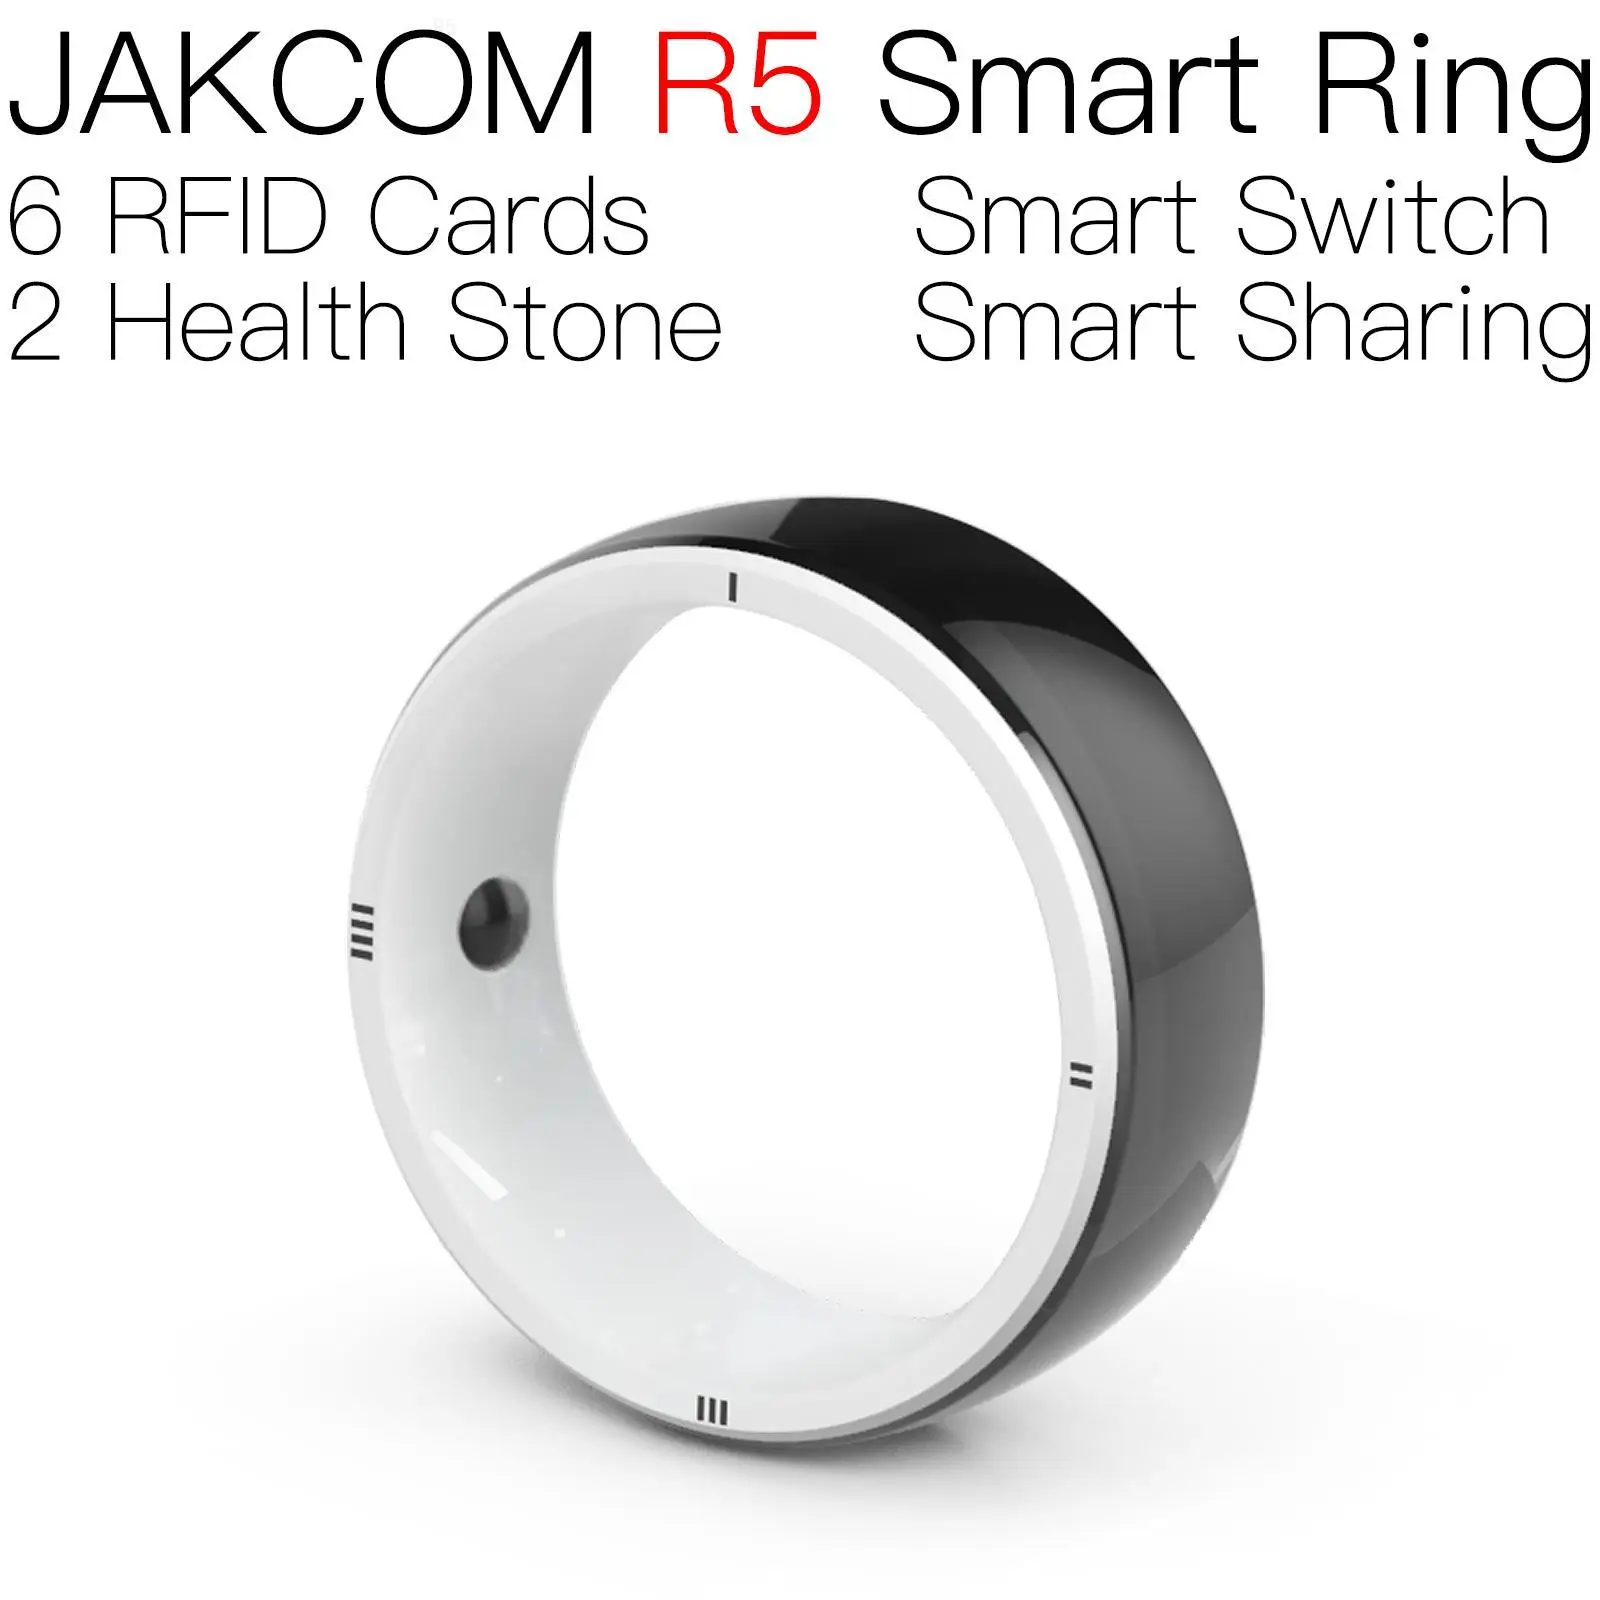 

JAKCOM R5 Smart Ring Newer than siemens iso c rfid tag washable card led cards 125khz rewritable uhf uid changeable fix nfc